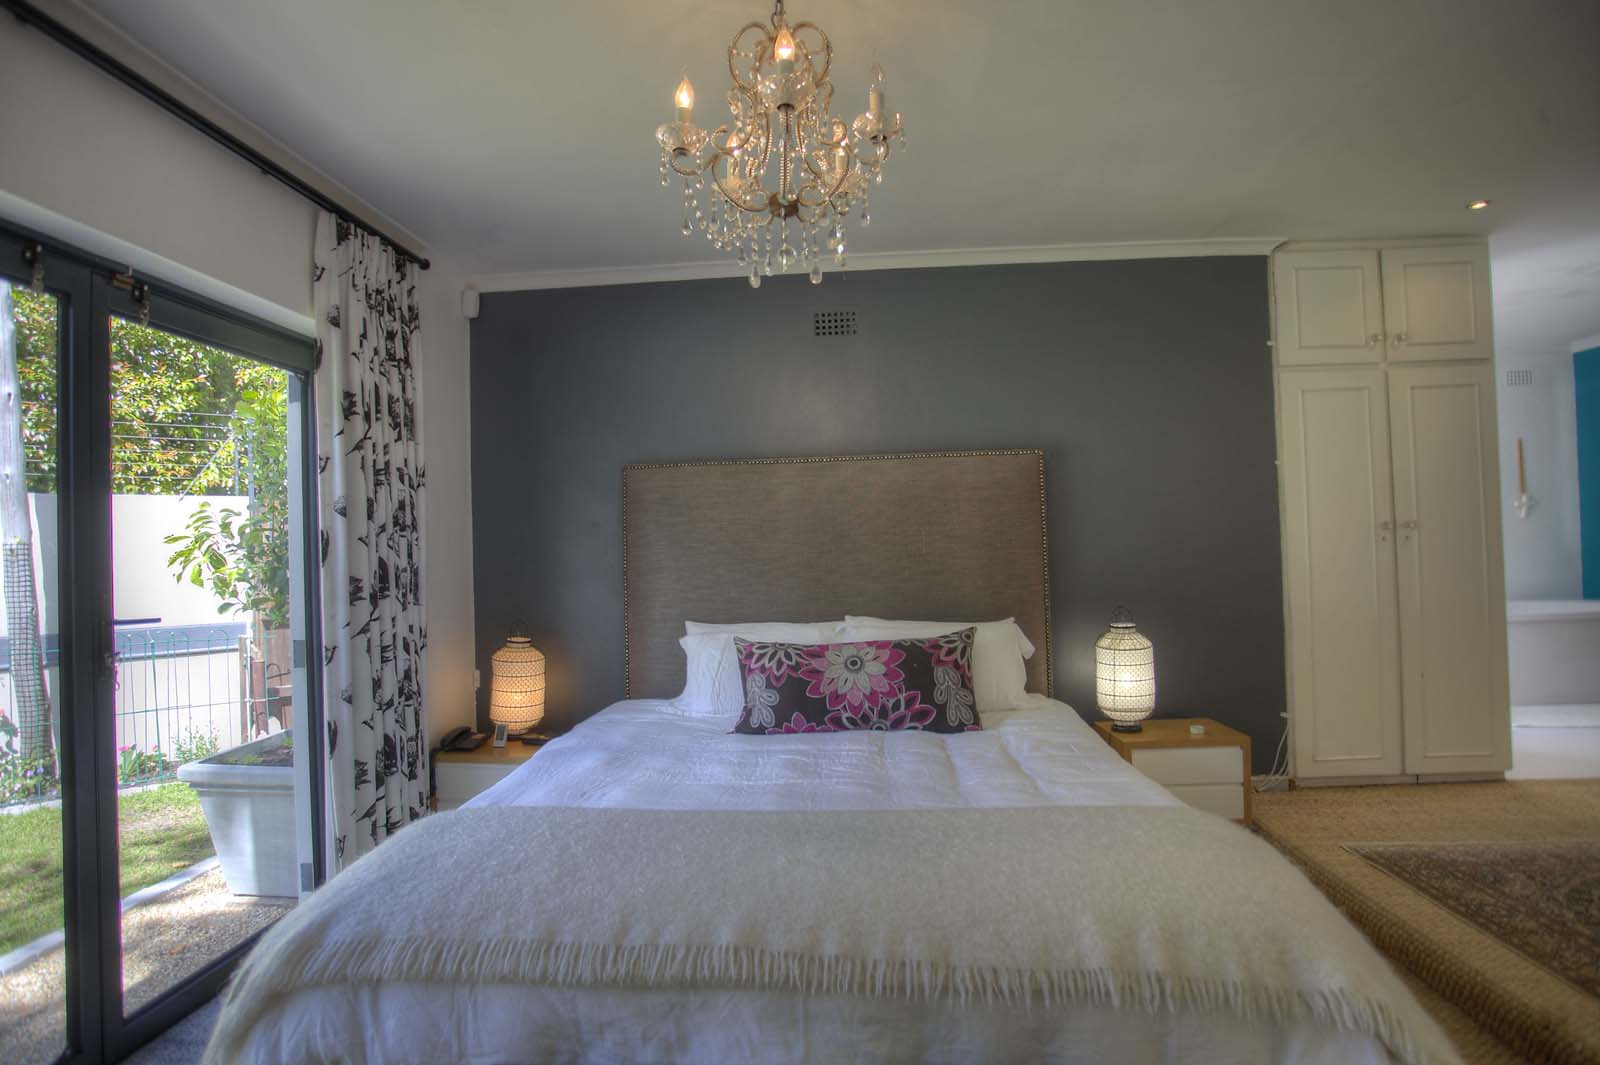 Photo 3 of Villa Robertson accommodation in Constantia, Cape Town with 4 bedrooms and 3 bathrooms